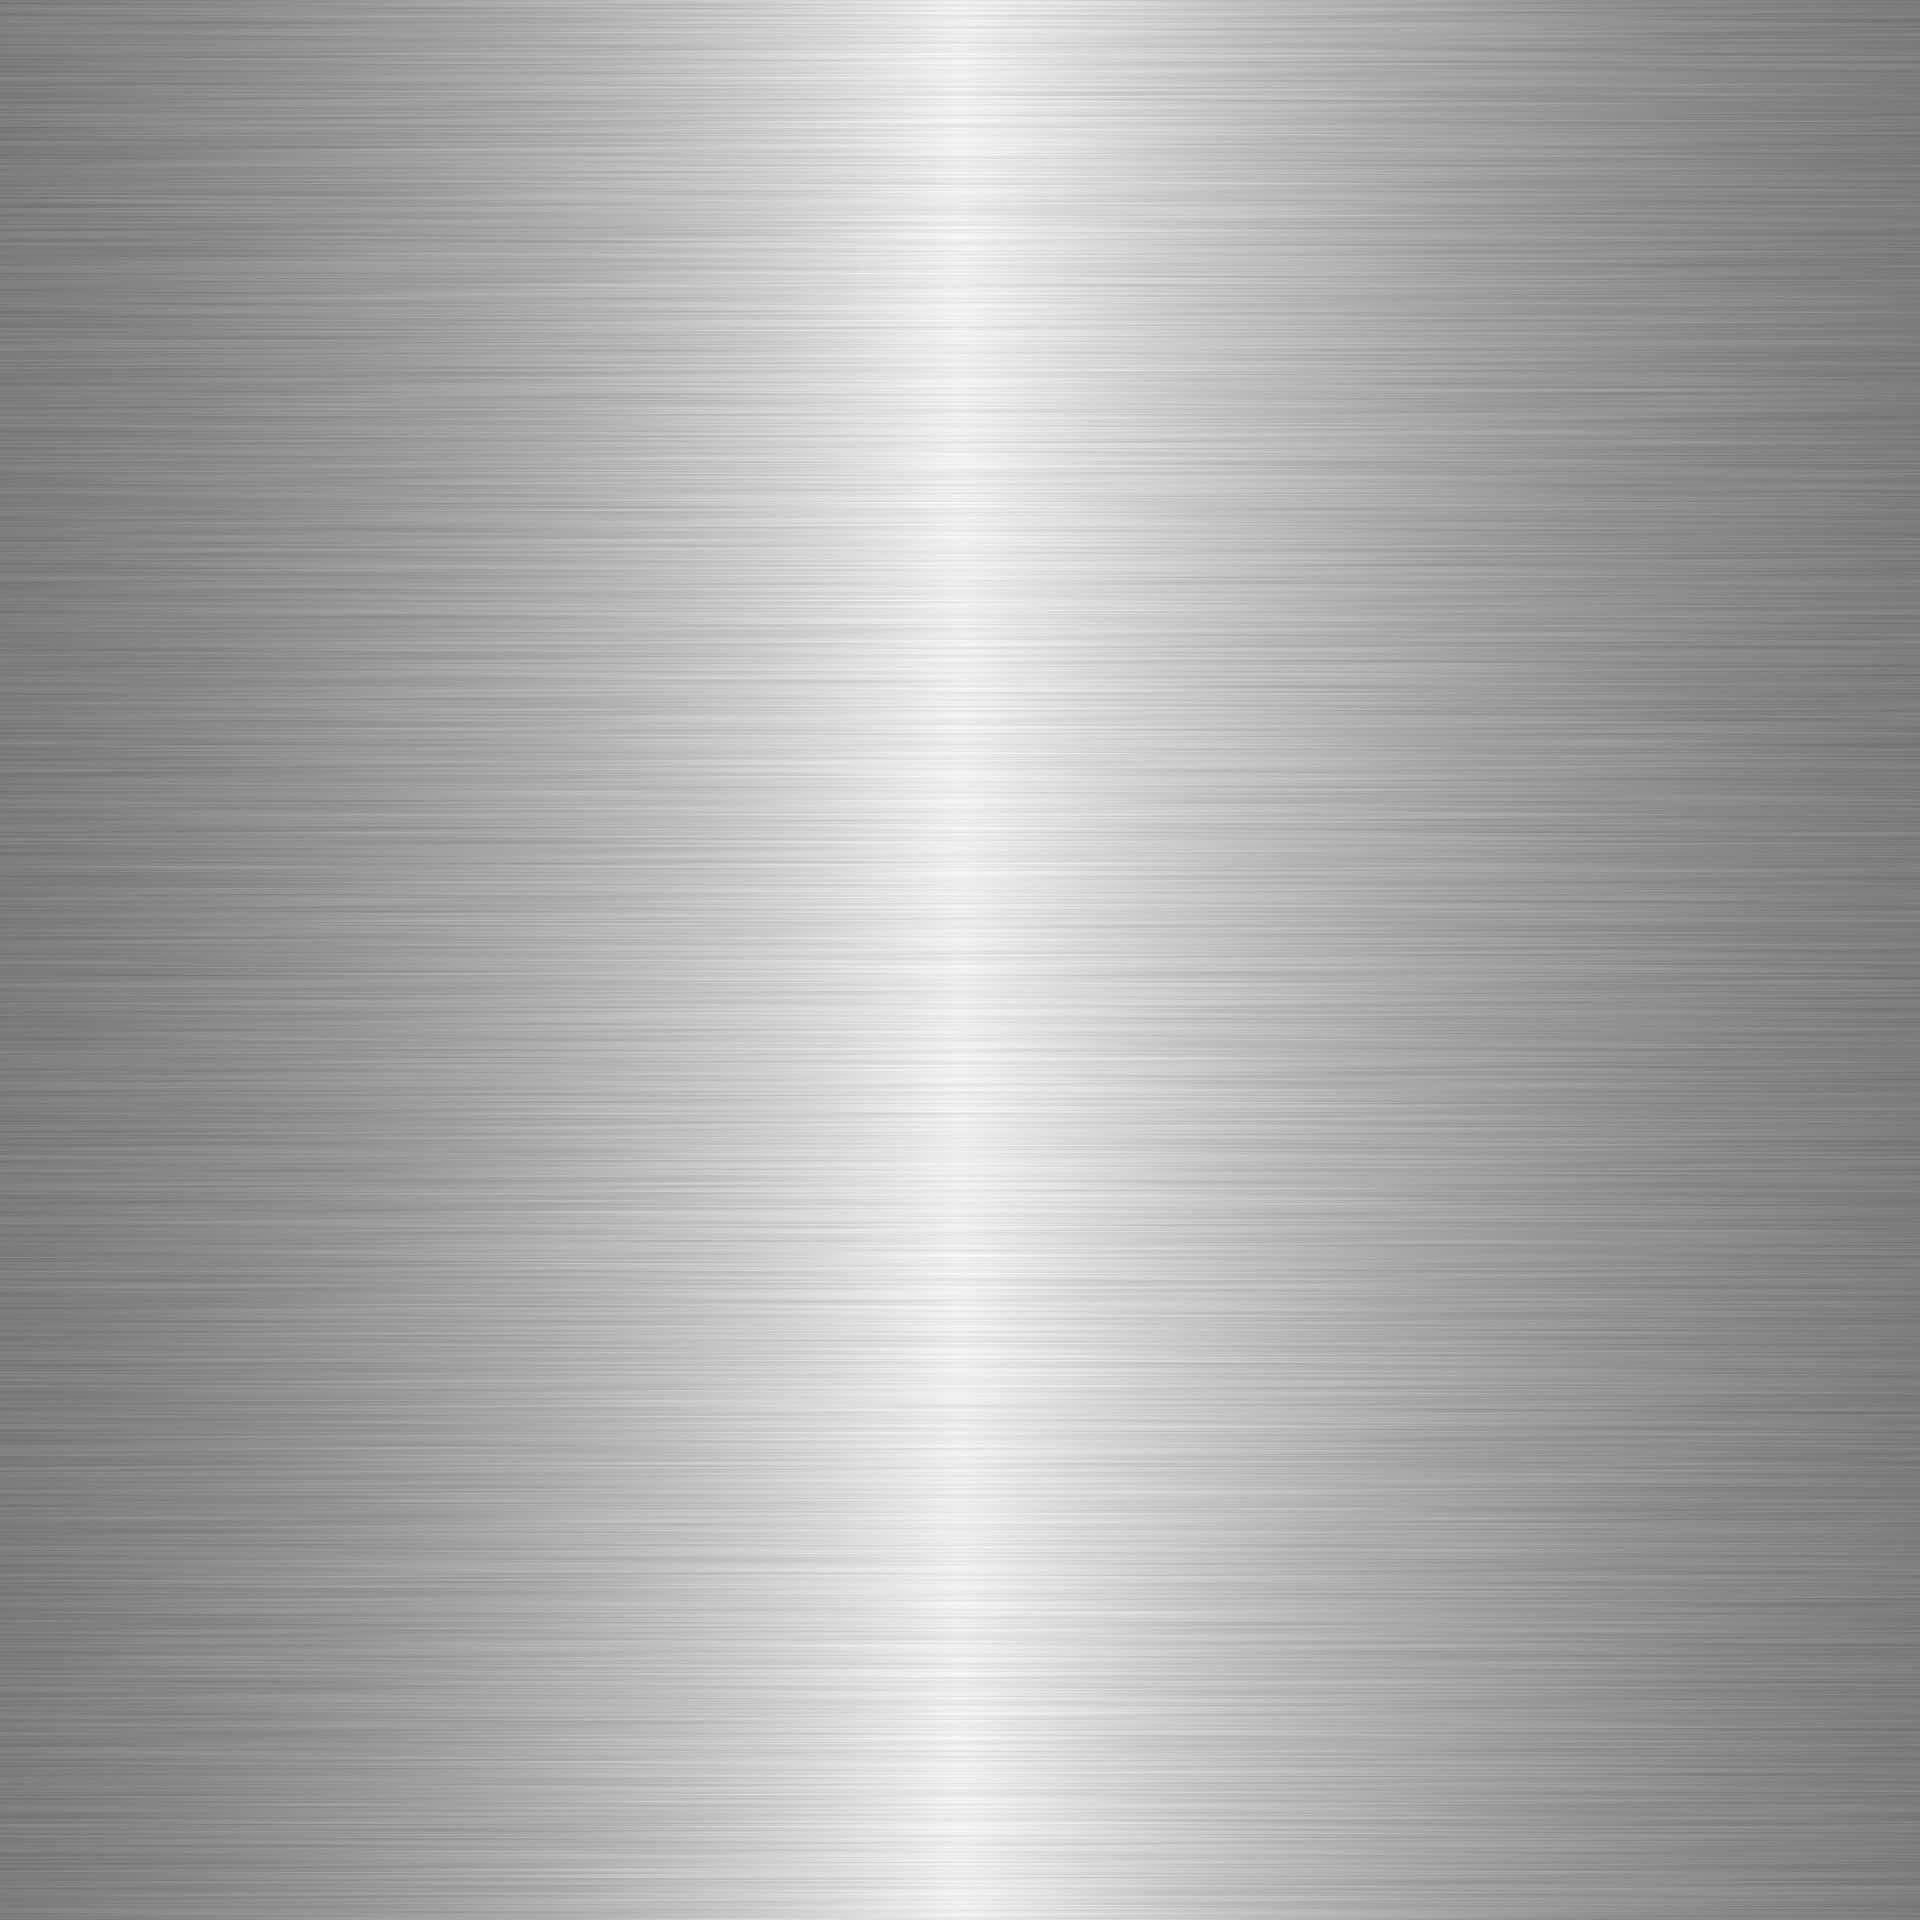 Download Metallic Silver Background 3500 X 3500 | Wallpapers.com